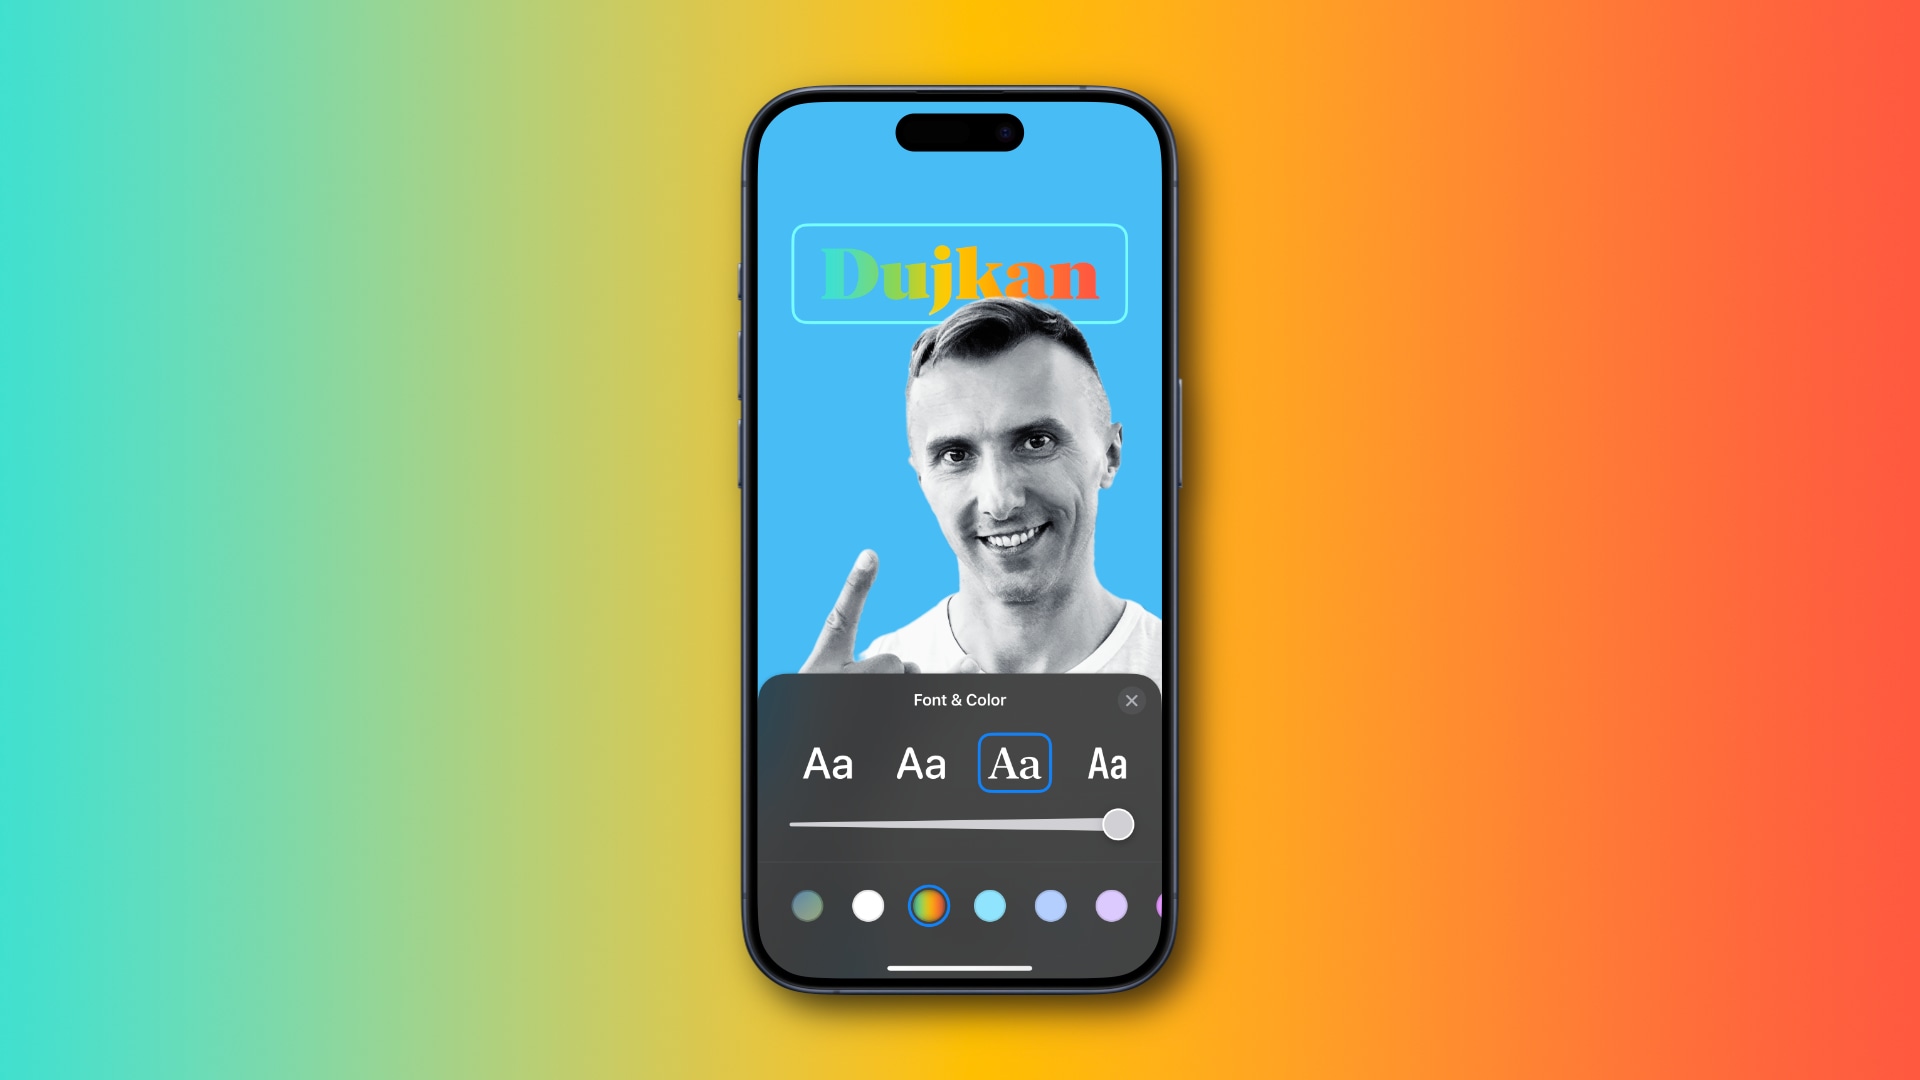 Using rainbow colors for the name on the iPhone's contact poster